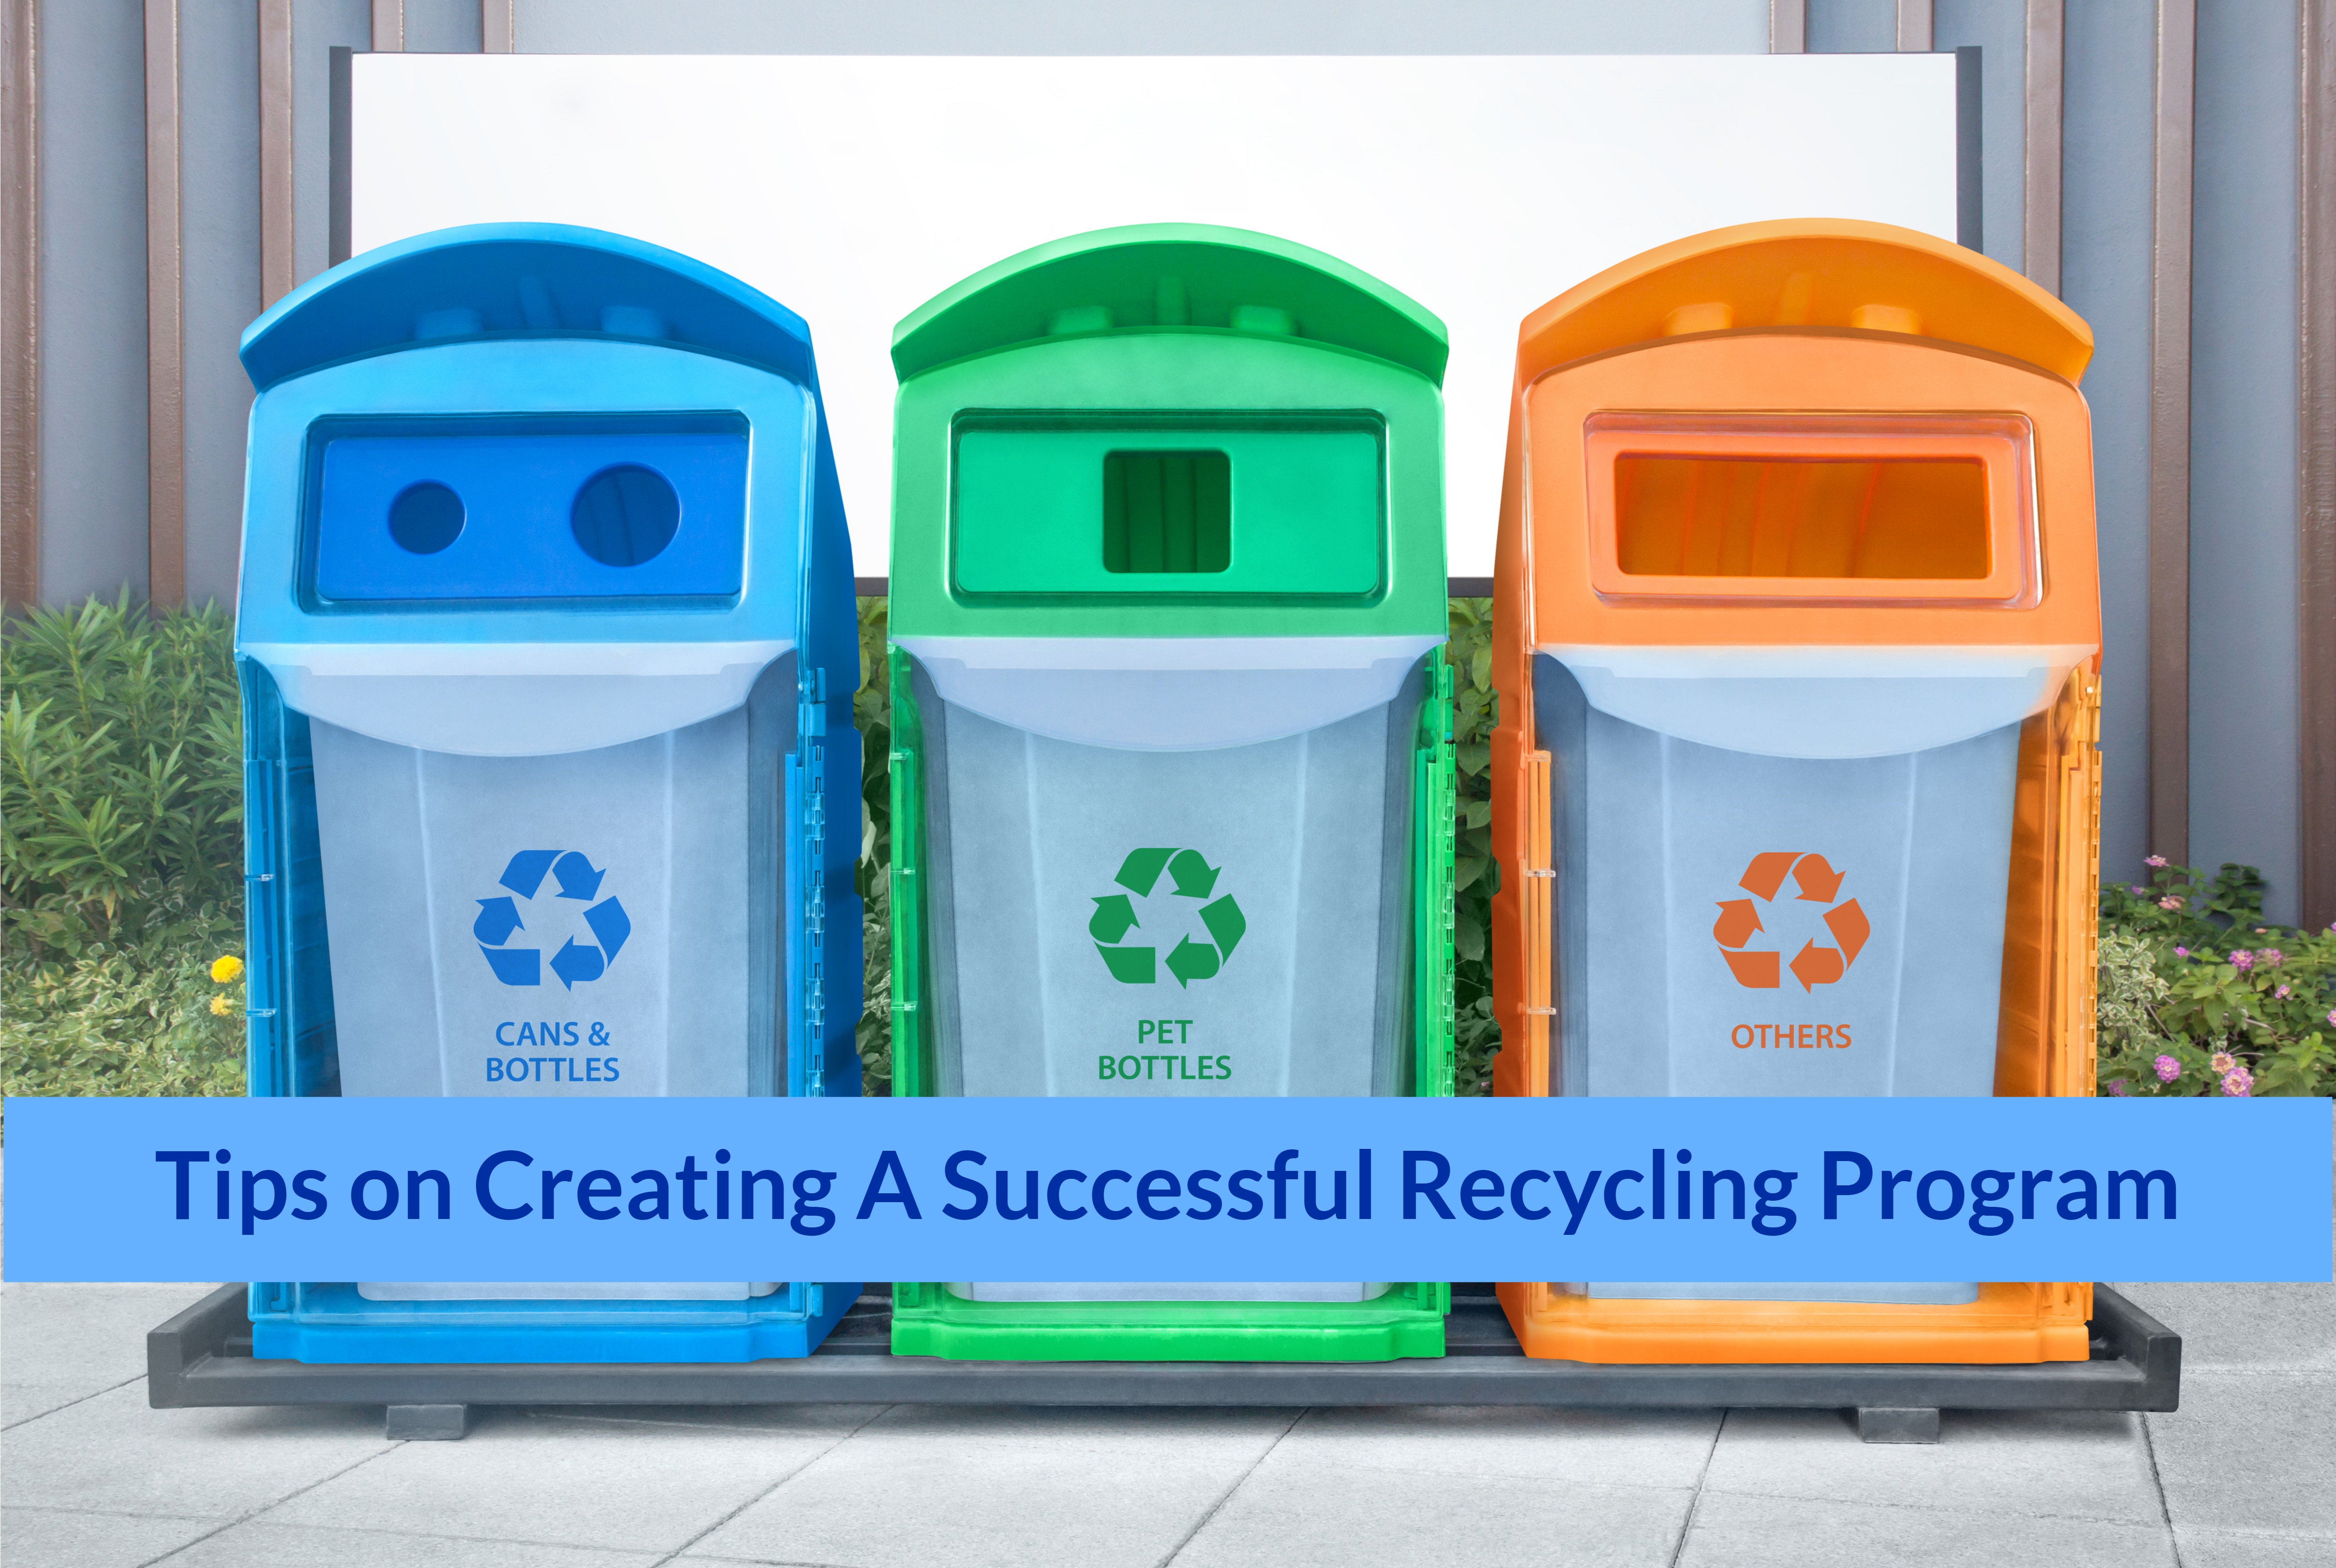 https://content.smoworks.com/hubfs/Tips%20on%20Creating%20a%20Successful%20Recycling%20Program%20%20%281%29.jpg